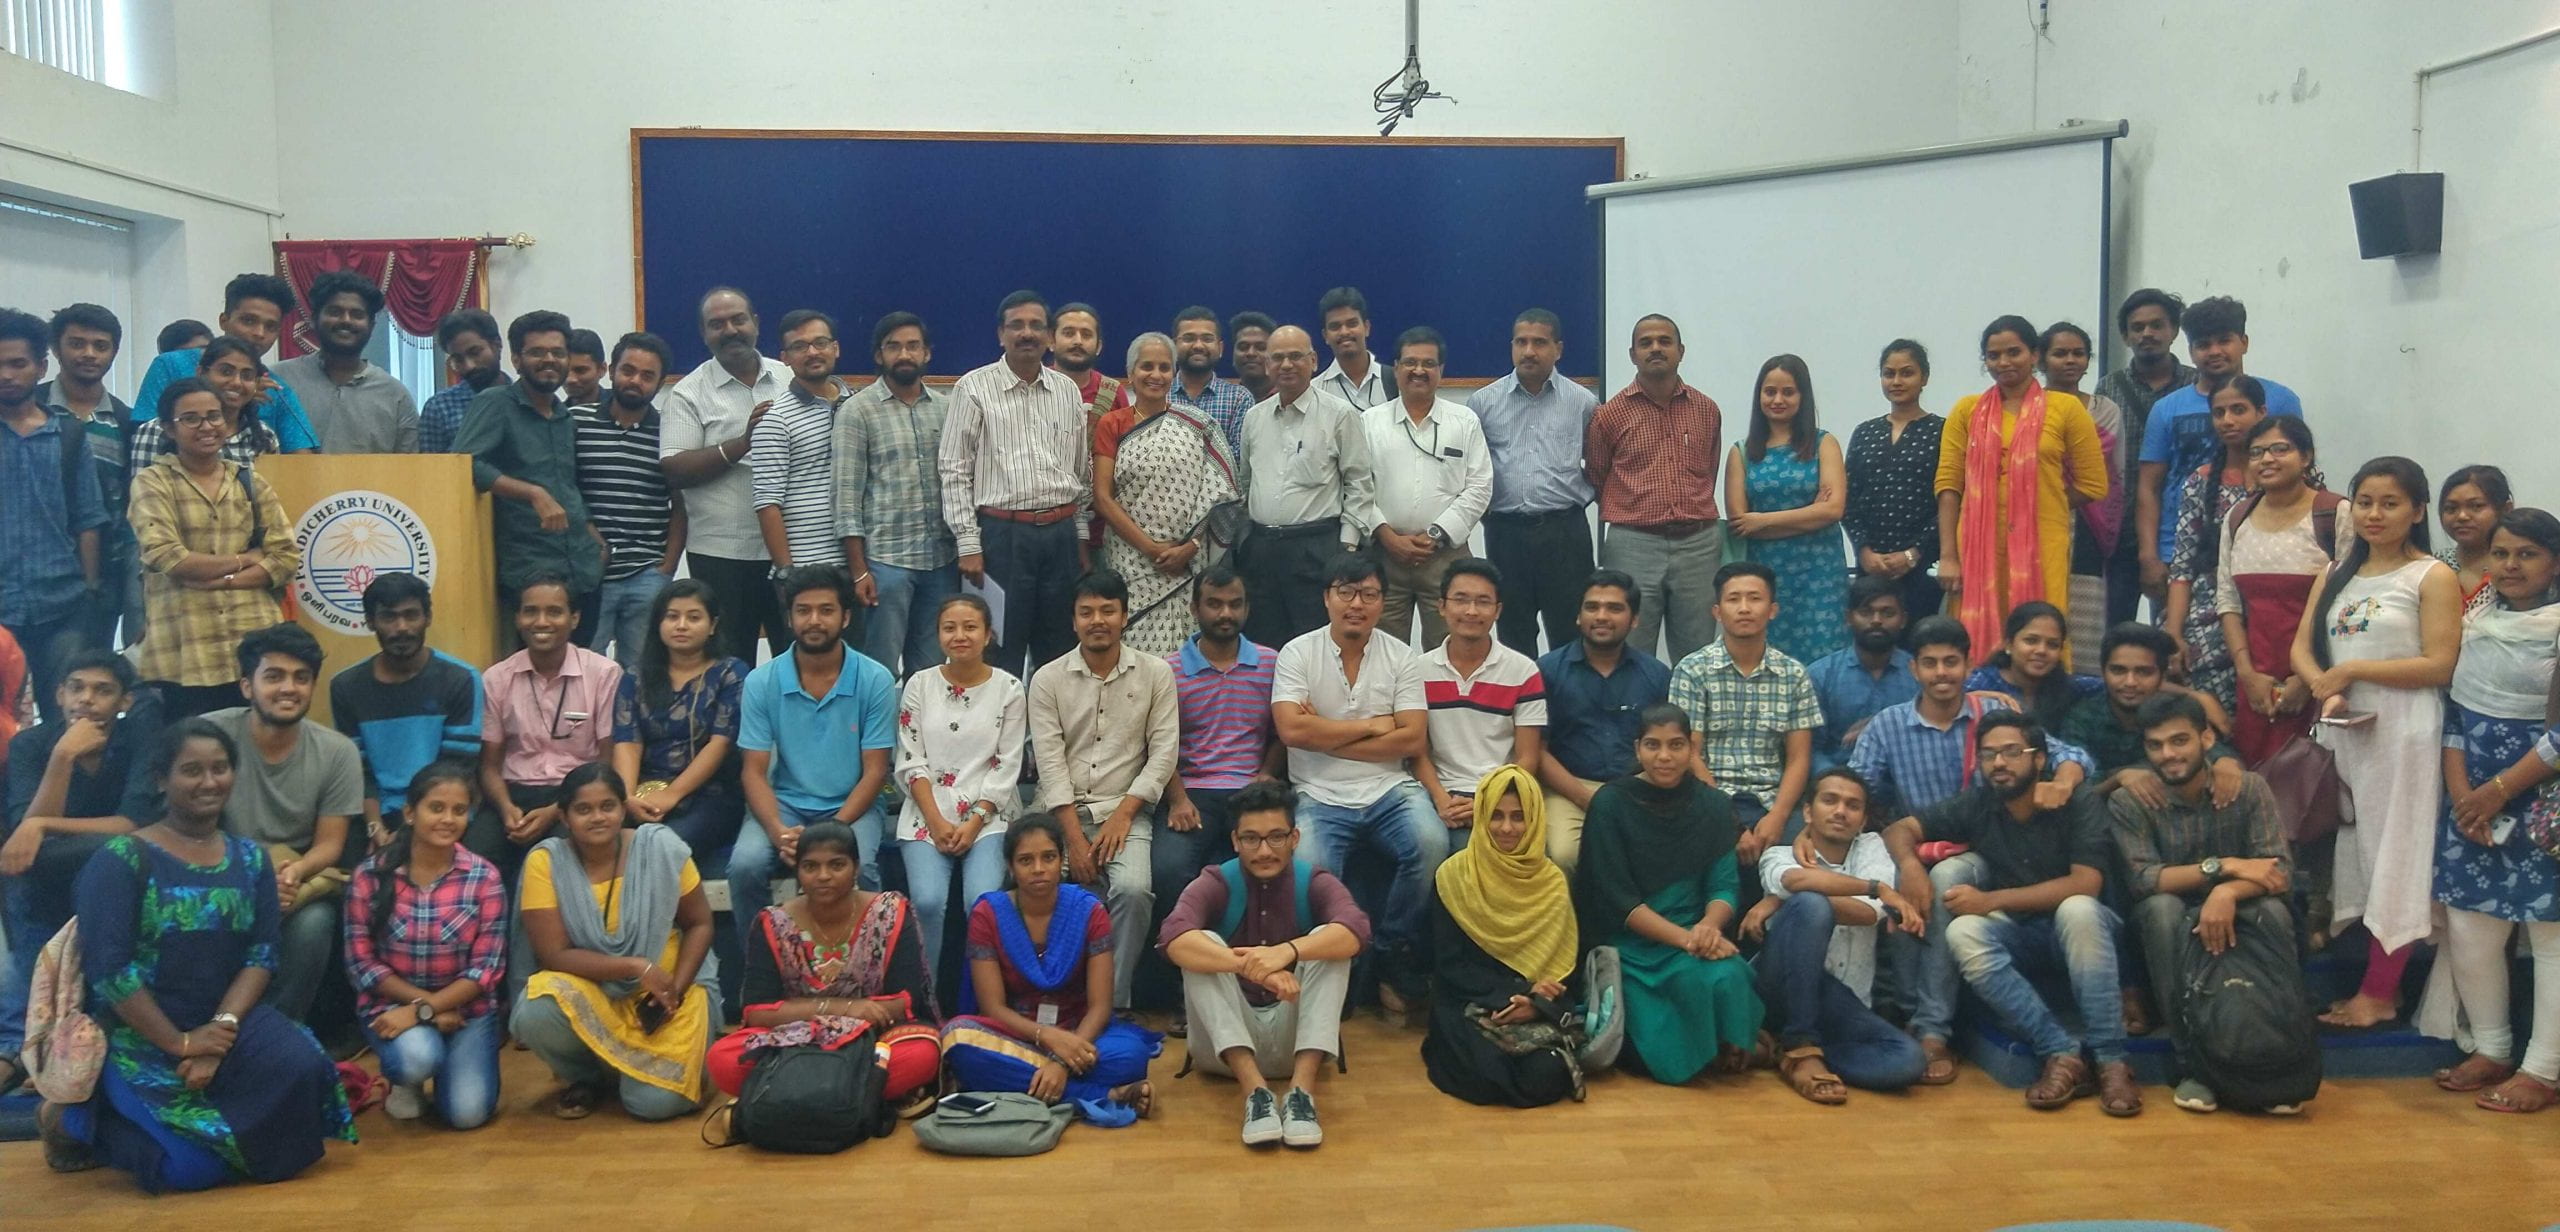 group photo of Students and Faculty at Pondicherry University